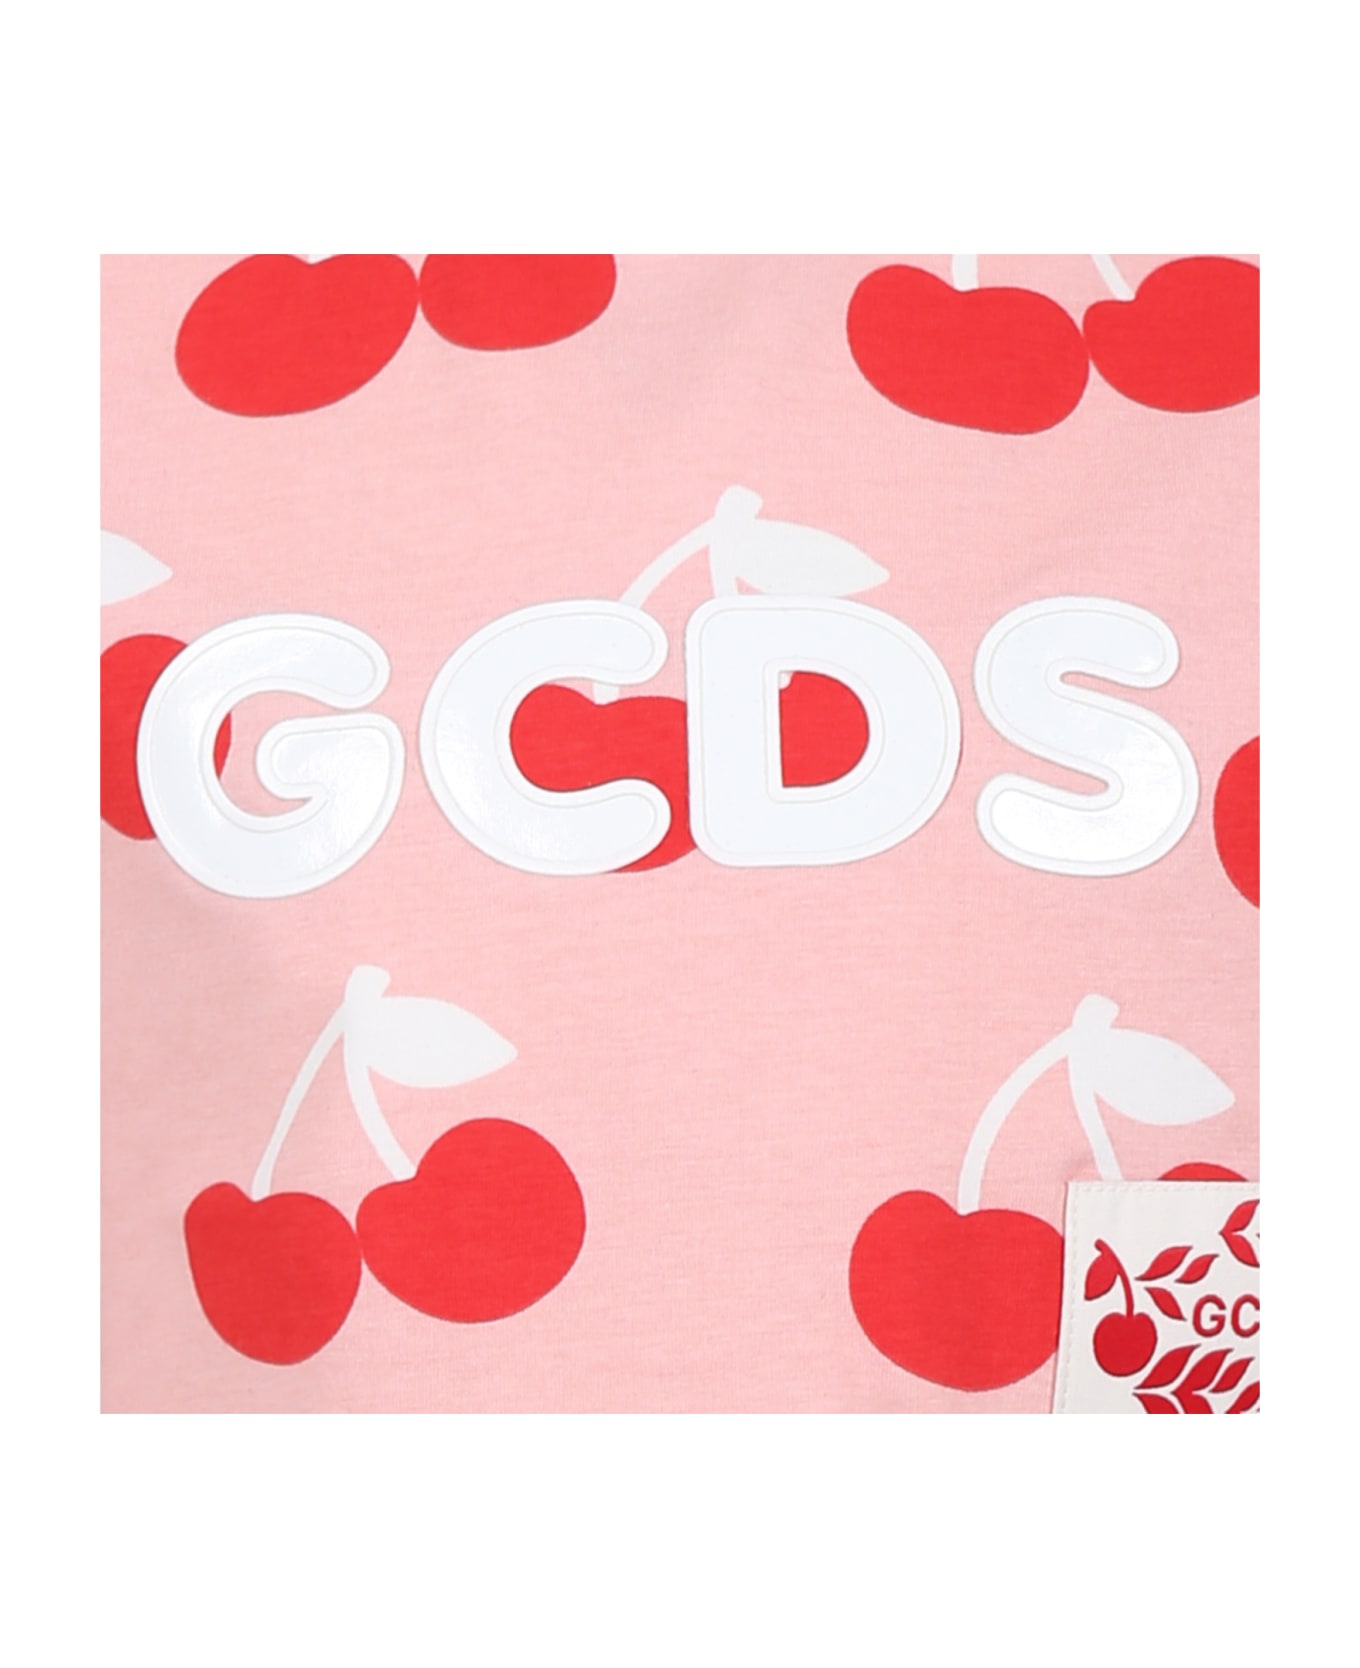 GCDS Mini Pink T-shirt For Girl With All-over Cherry Print - Pink